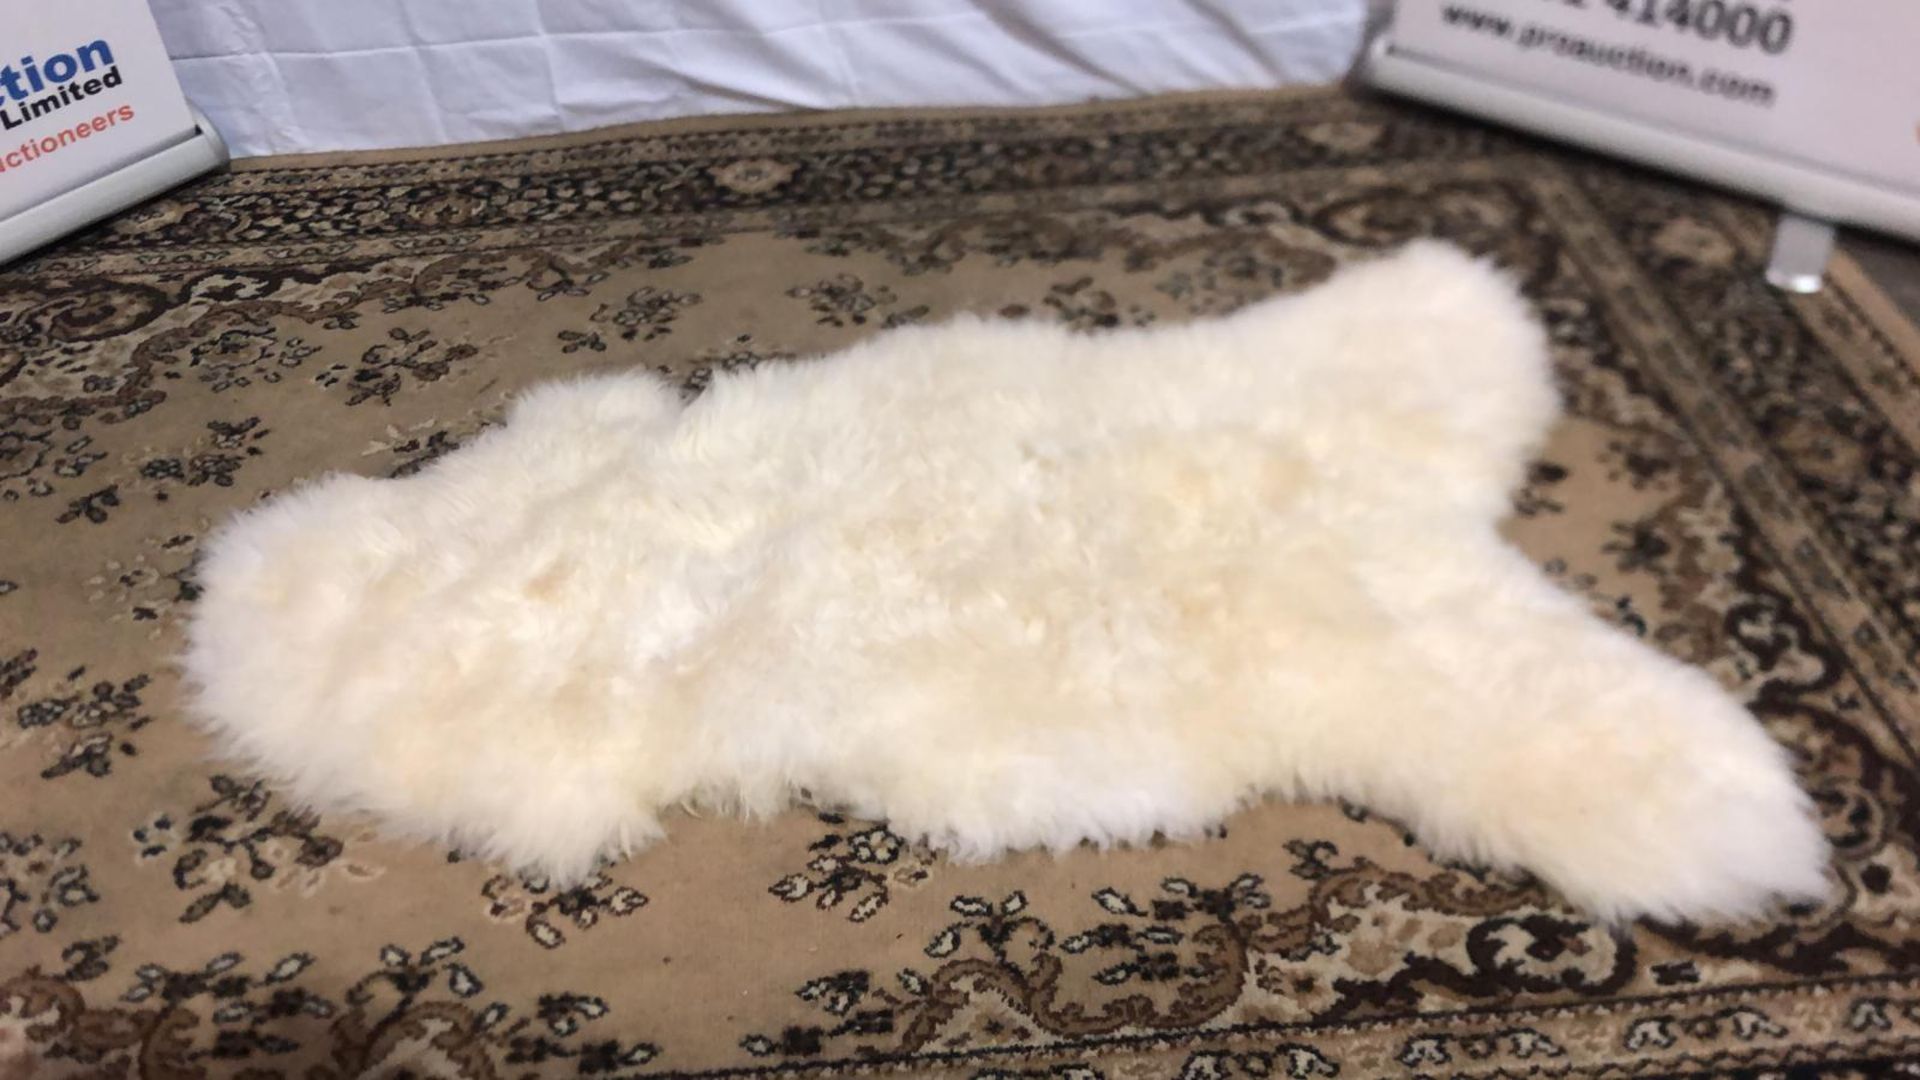 Natural White Large Sheepskin Rug Approximately 105 X 66cms Sheepskin Rug Their Soft, Tanned Leather - Bild 2 aus 2